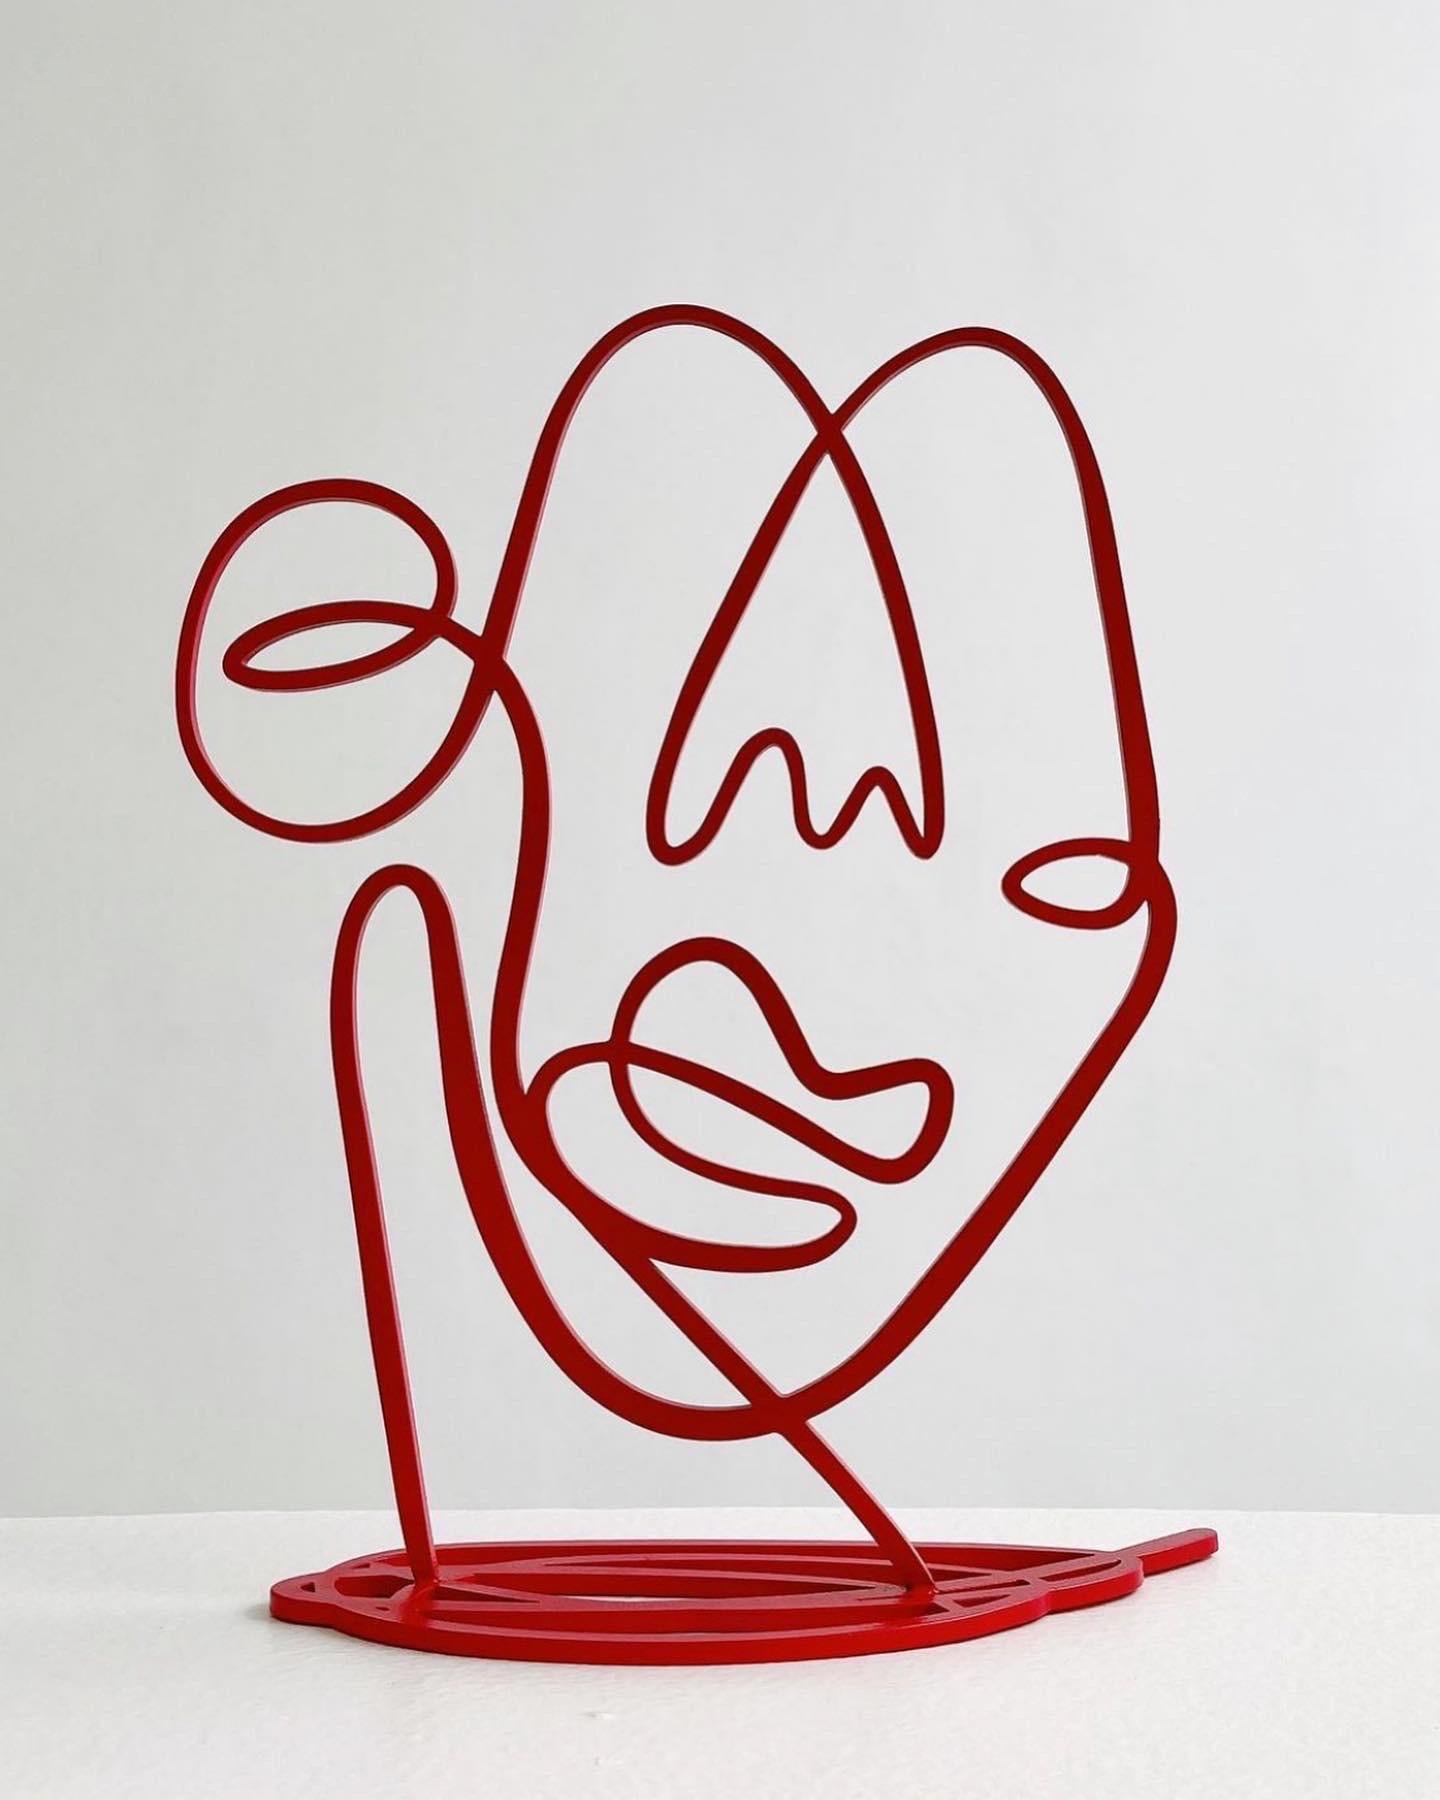 Red Face, 2022
Contemporary Art, Abstract Sculpture
Steel
36x33x10cm
Open Edition

